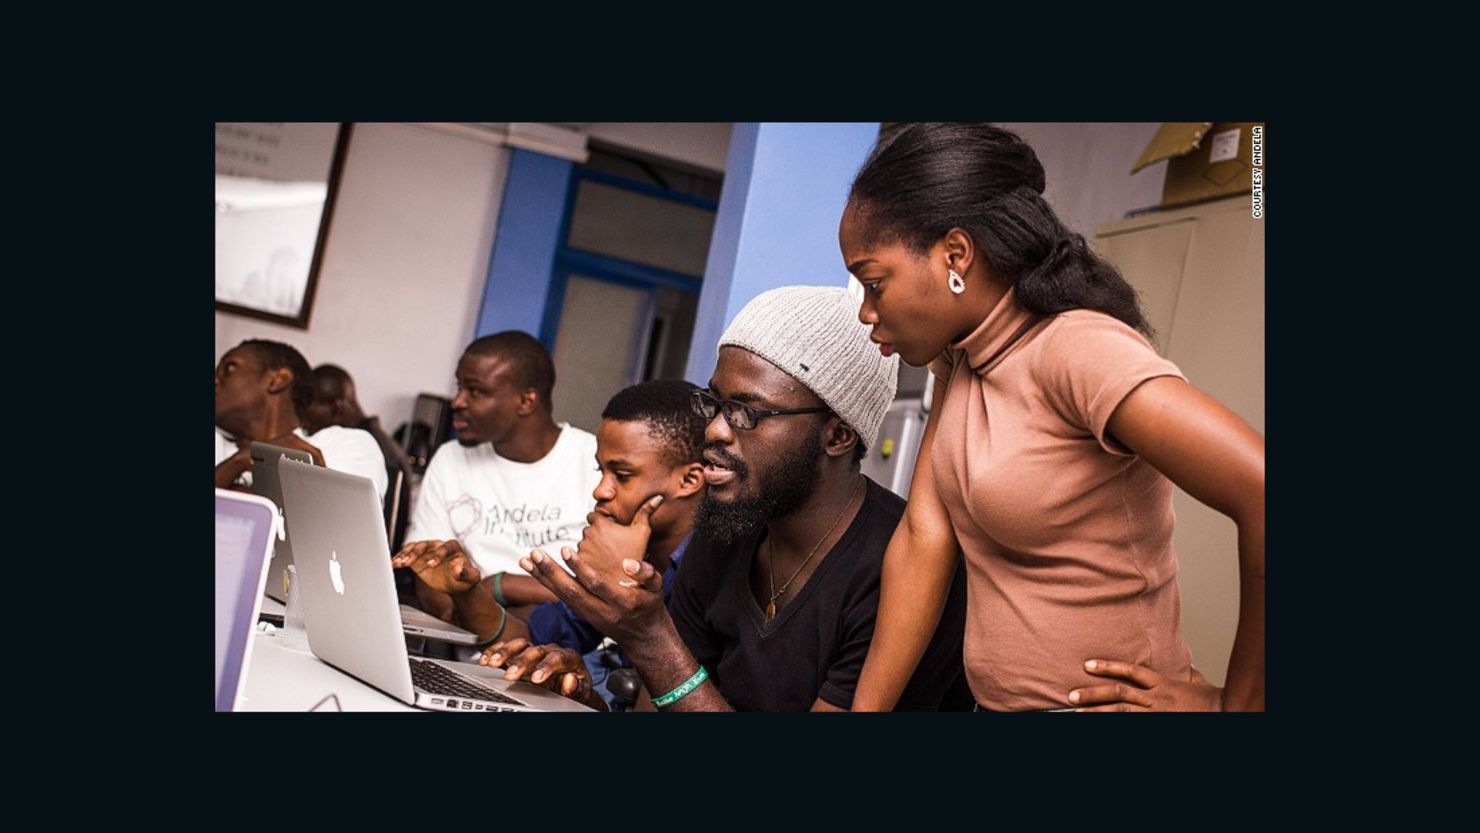 Andela, a tech company, scouts for smart Nigerians with talent for tech, trains them and places them to work for international companies like Microsoft, while still based in Nigeria.